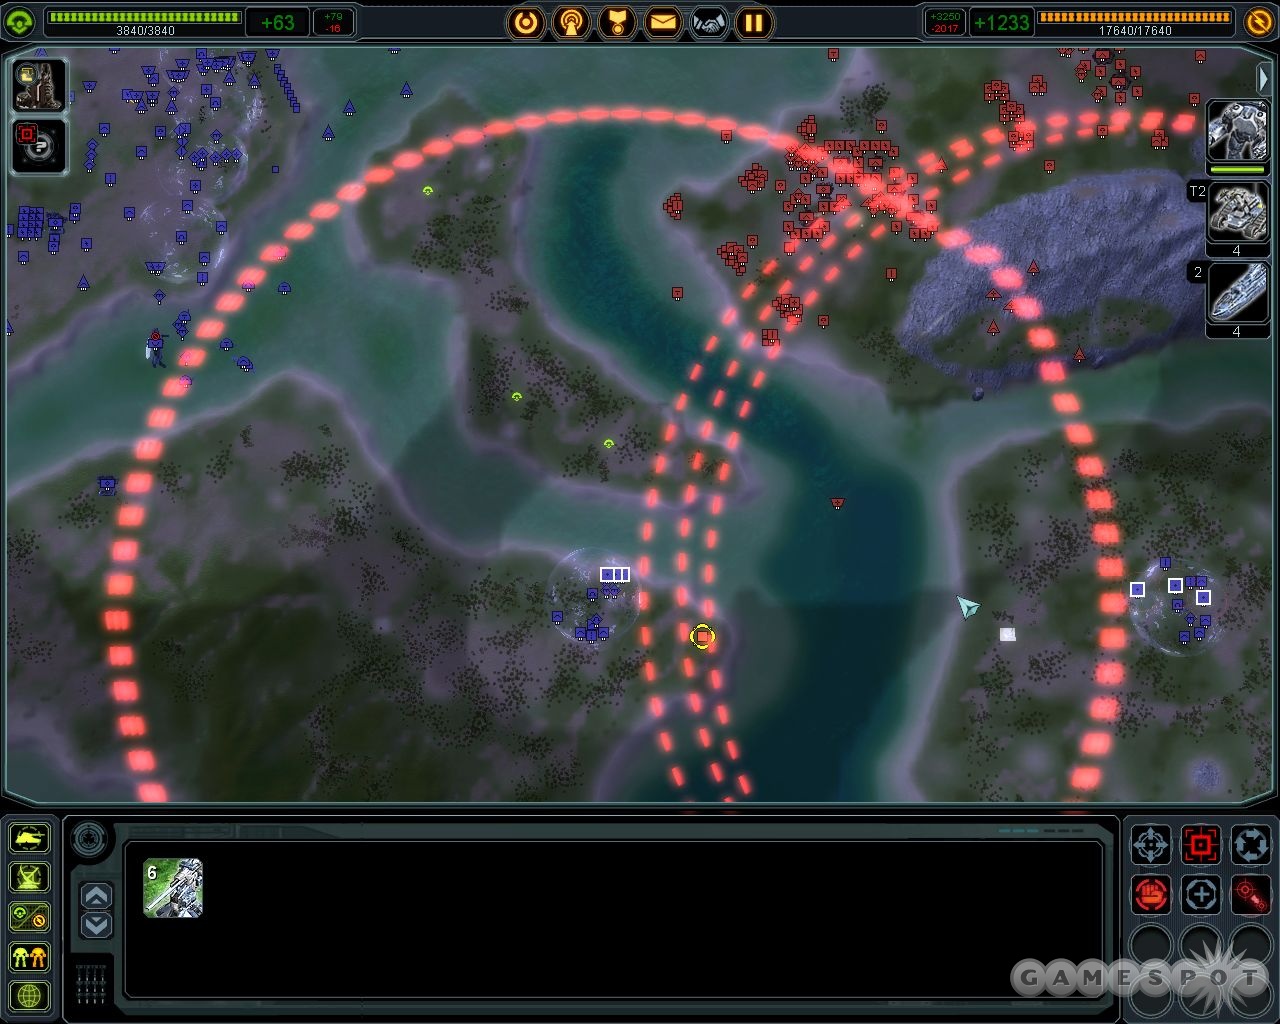 With enough engineers, you can build plenty of artillery units that can fire on th enemy base.